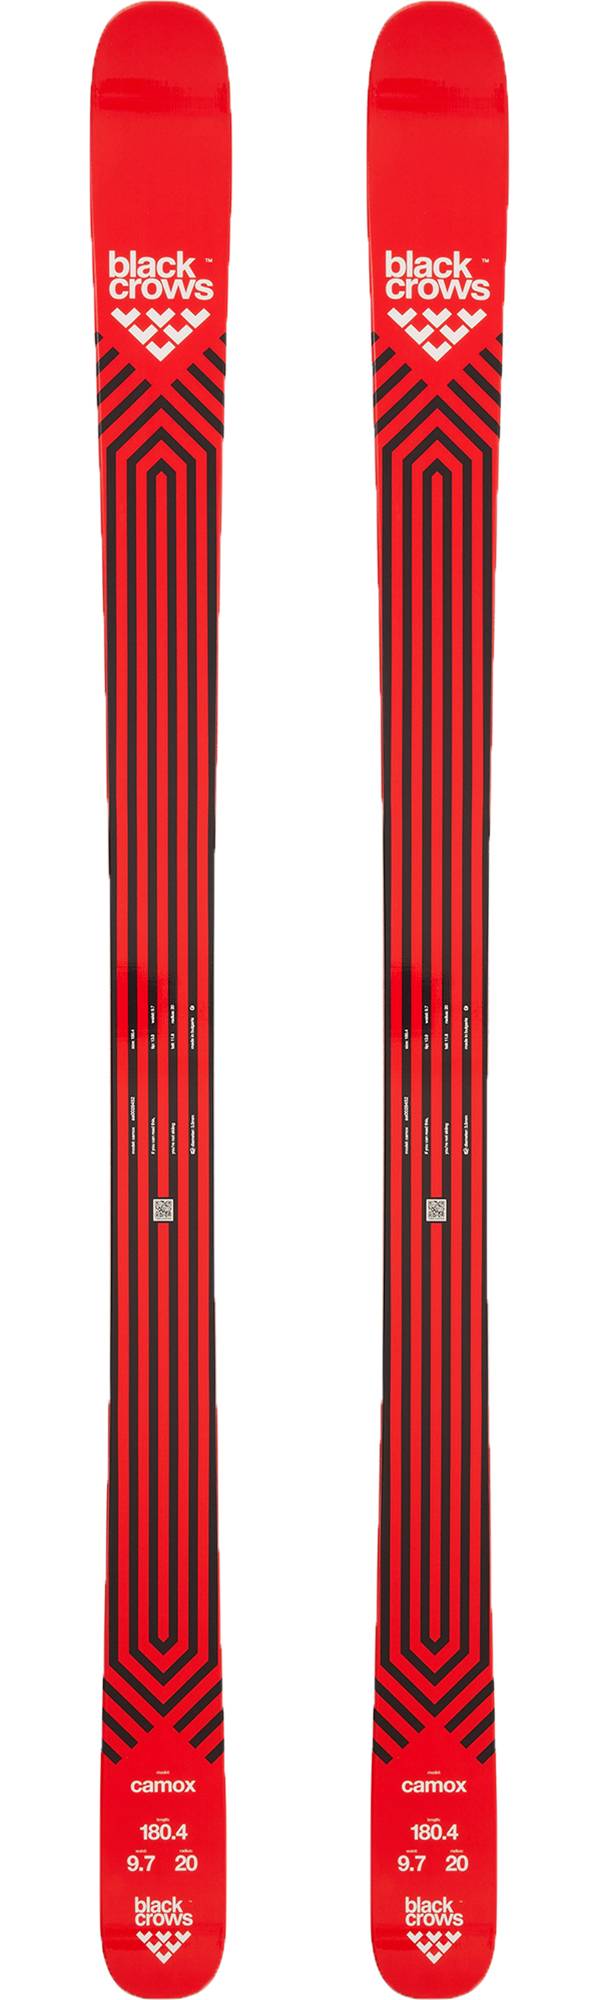 blackcrows '21-'22 Camox All-Mountain Skis product image